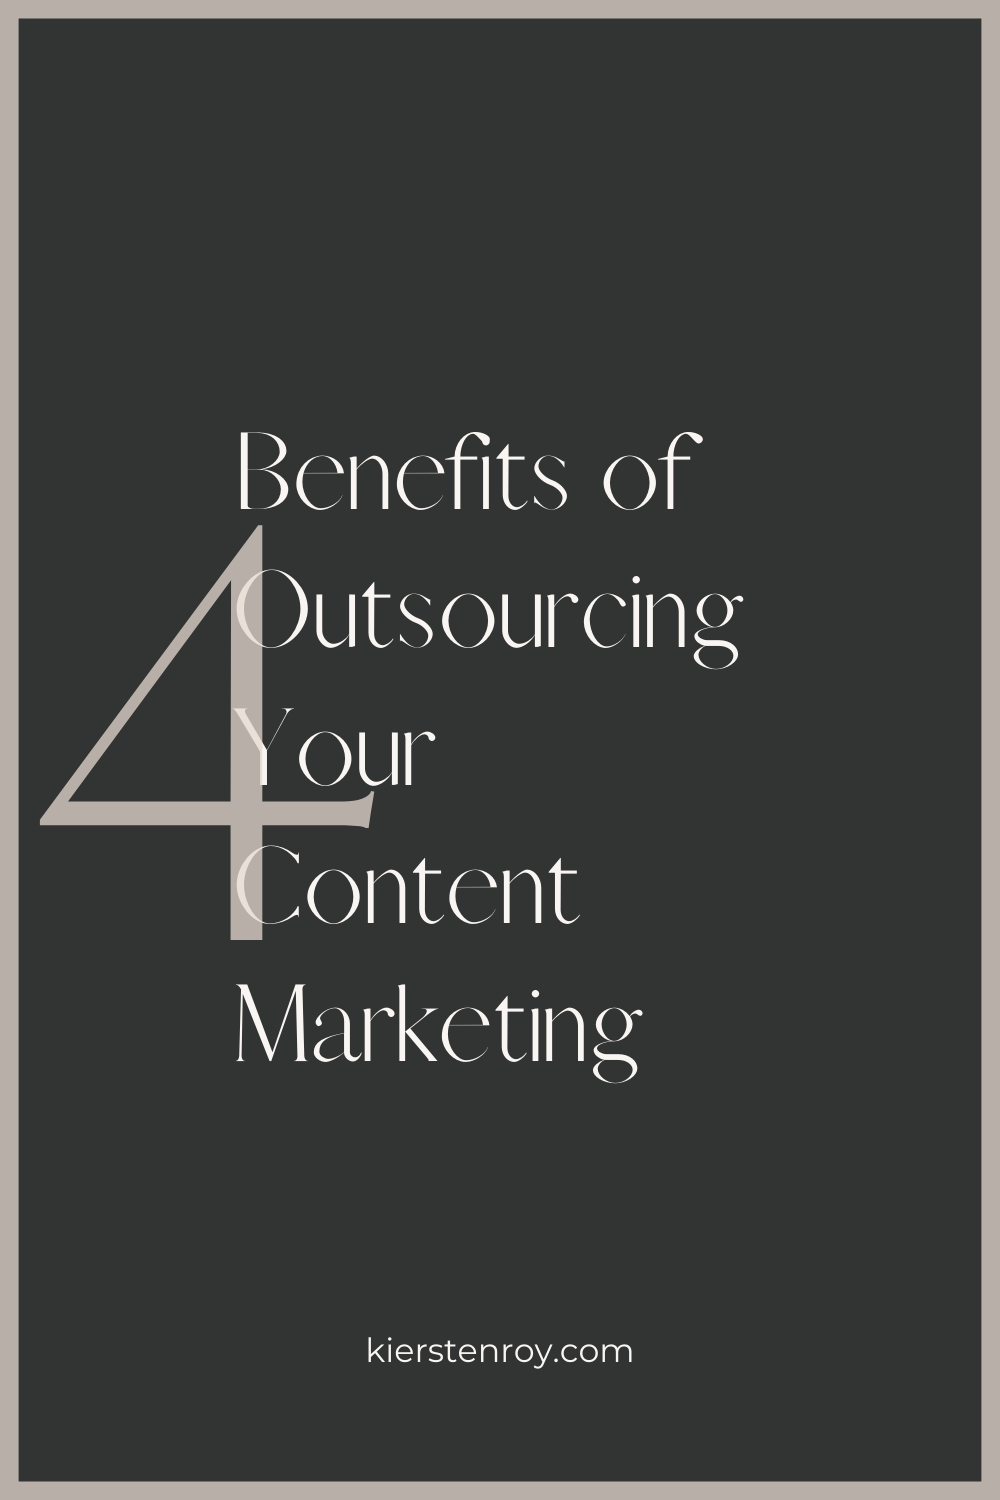 4 Benefits of Outsourcing Your Content Marketing